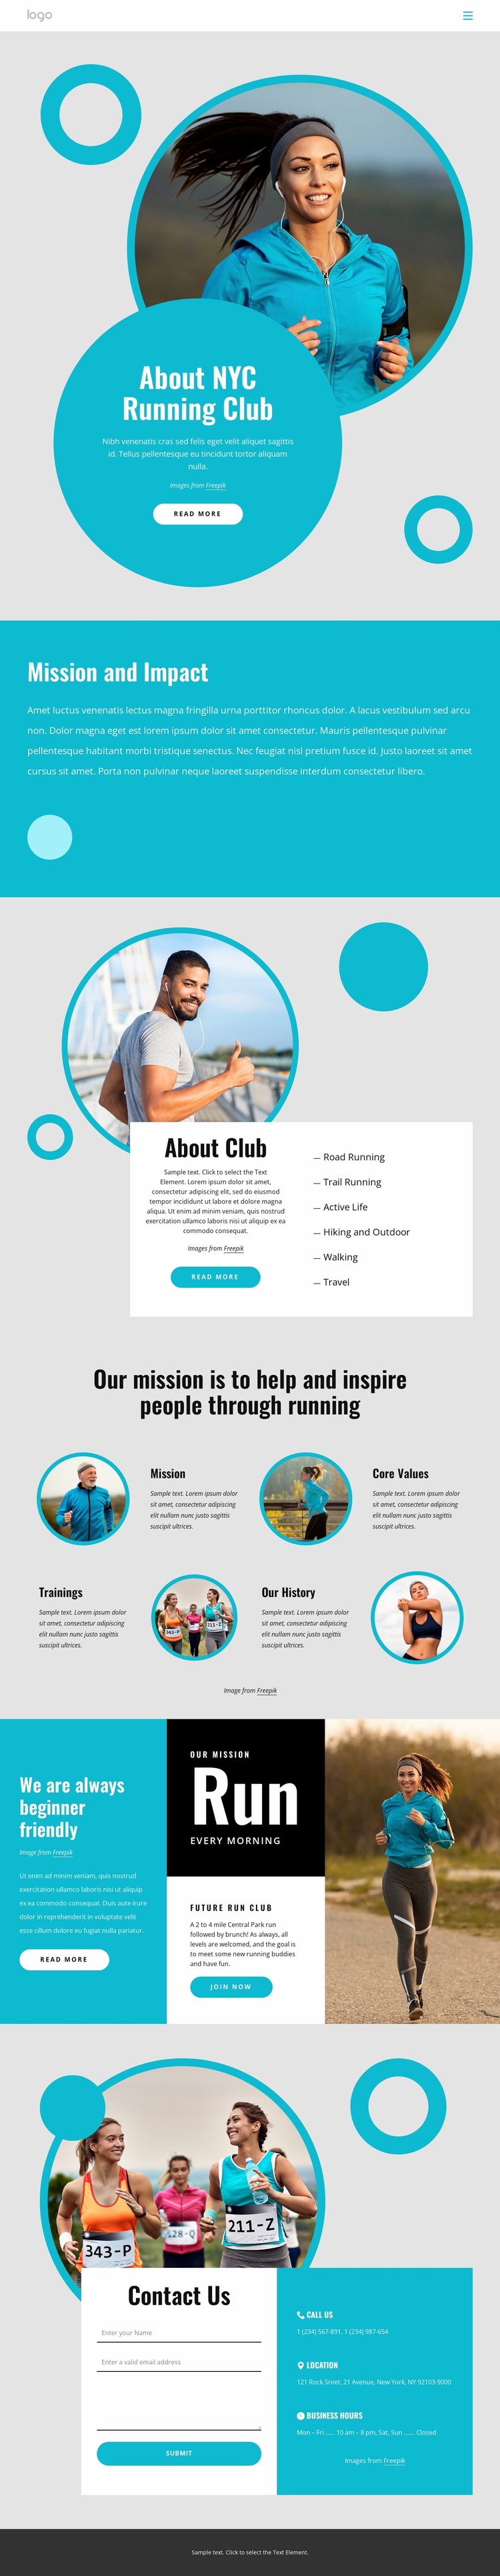 About NYC running club eCommerce Website Design